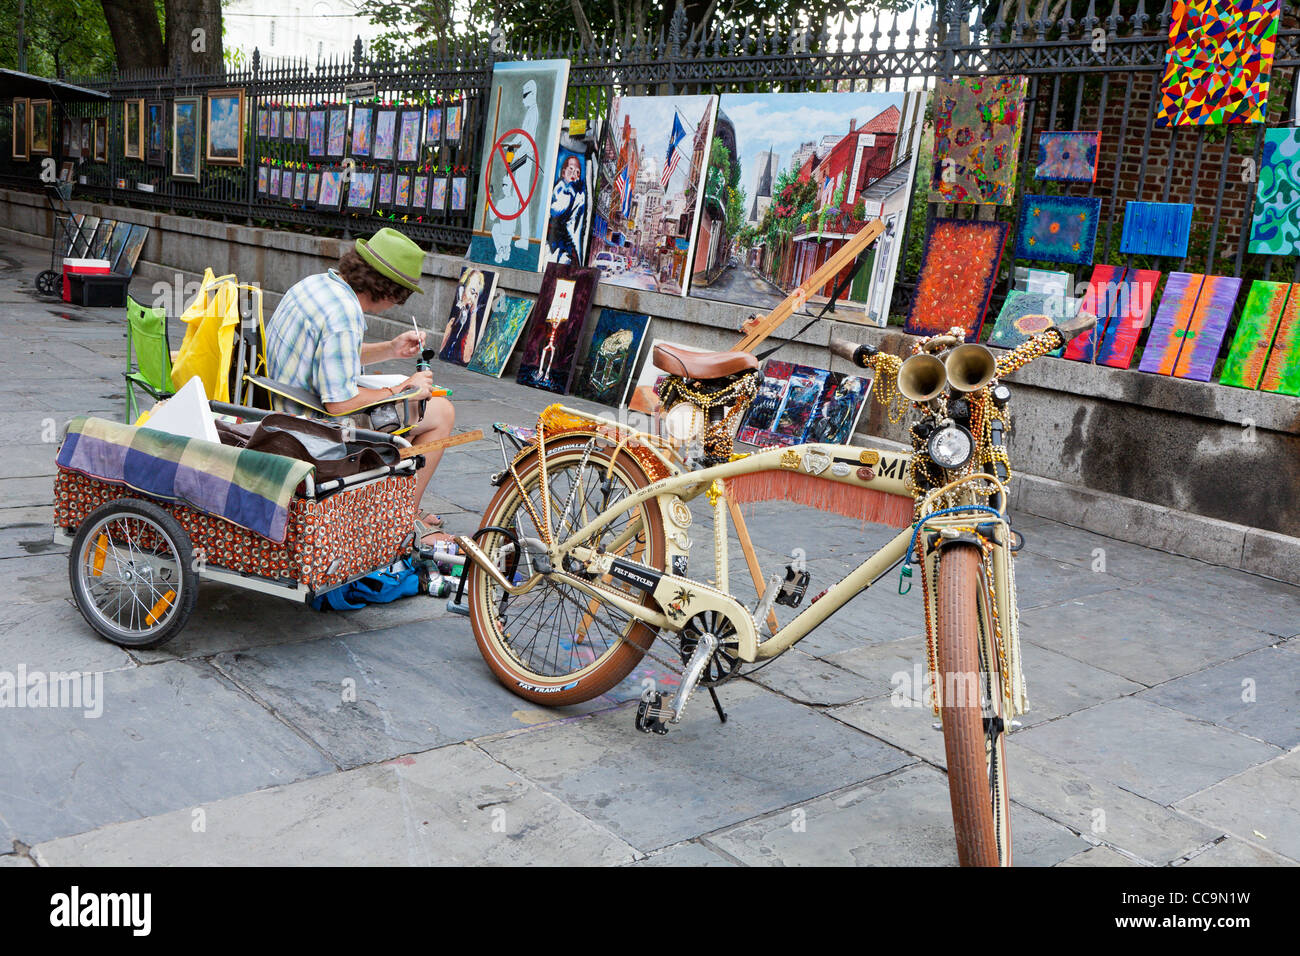 Artist with decorated bicycle creates paintings for sale along St. Peter Street in the French Quarter of New Orleans, LA Stock Photo